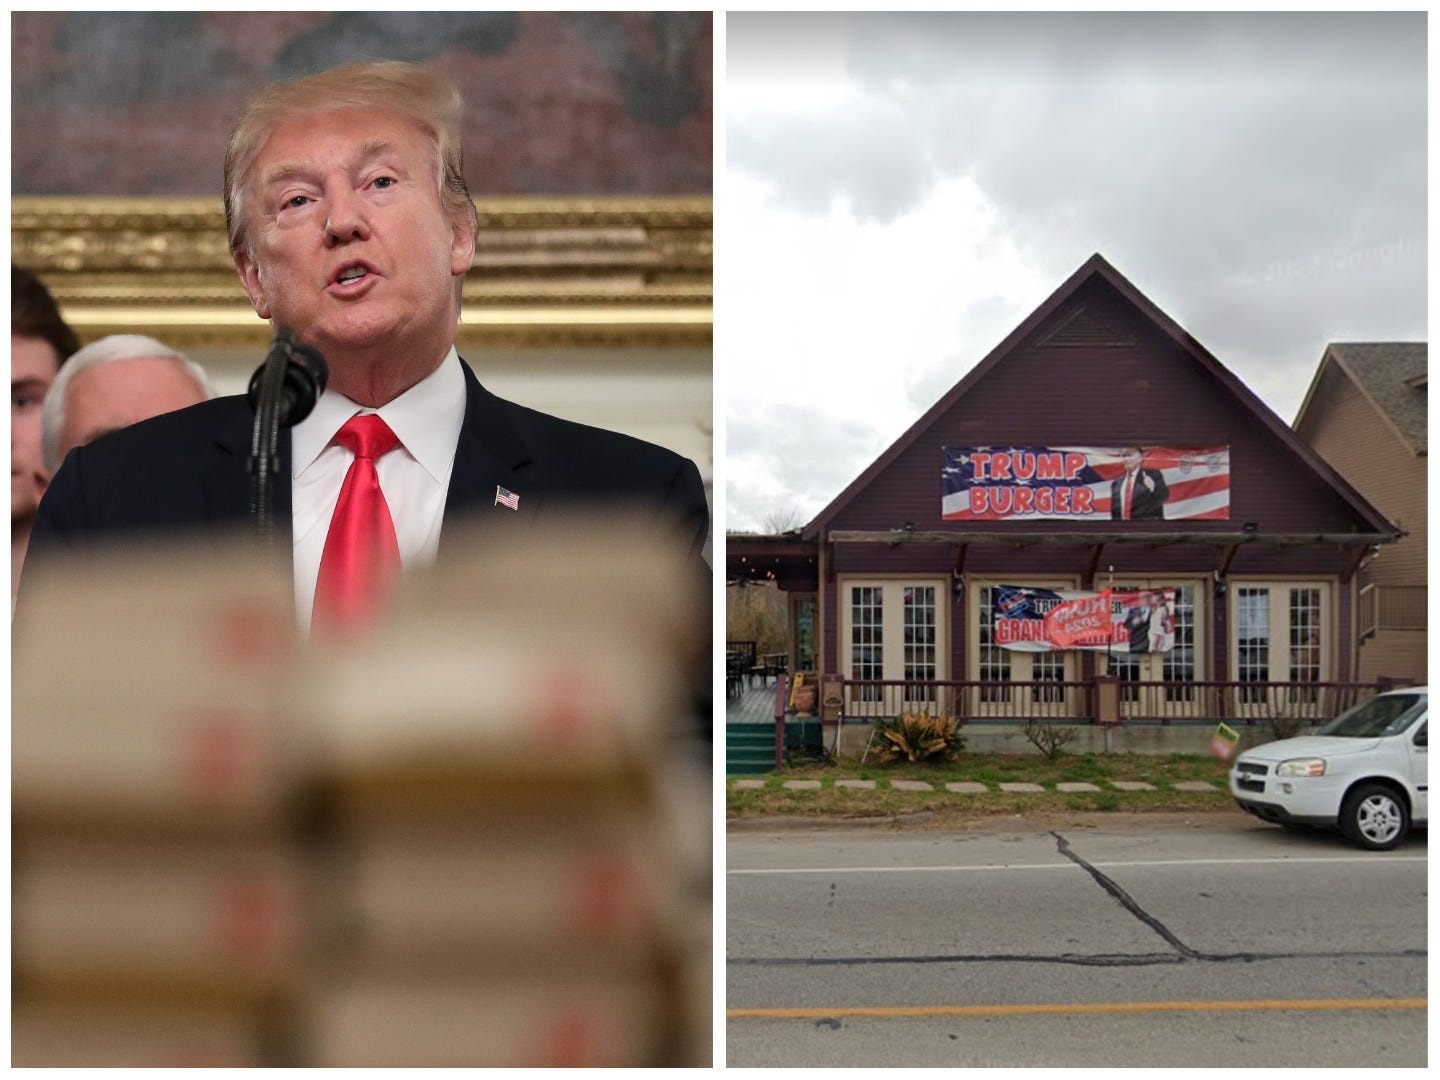 Trump Burger in Bellville, Texas pays tribute to the former President.